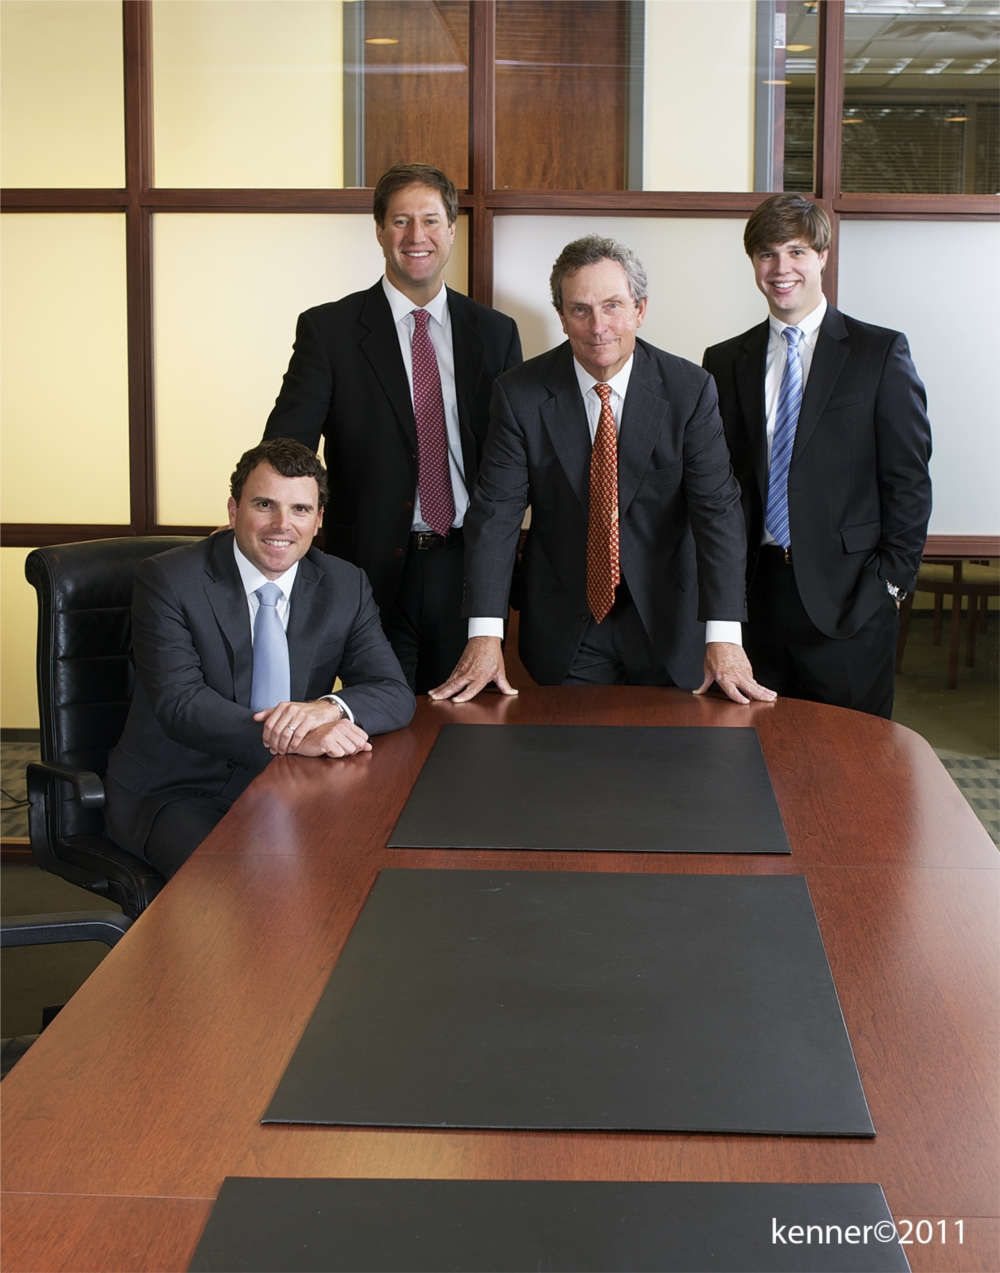 From left to right: William Tayloe, Jon Van Hoozer, Kent Wunderlich and John Summers